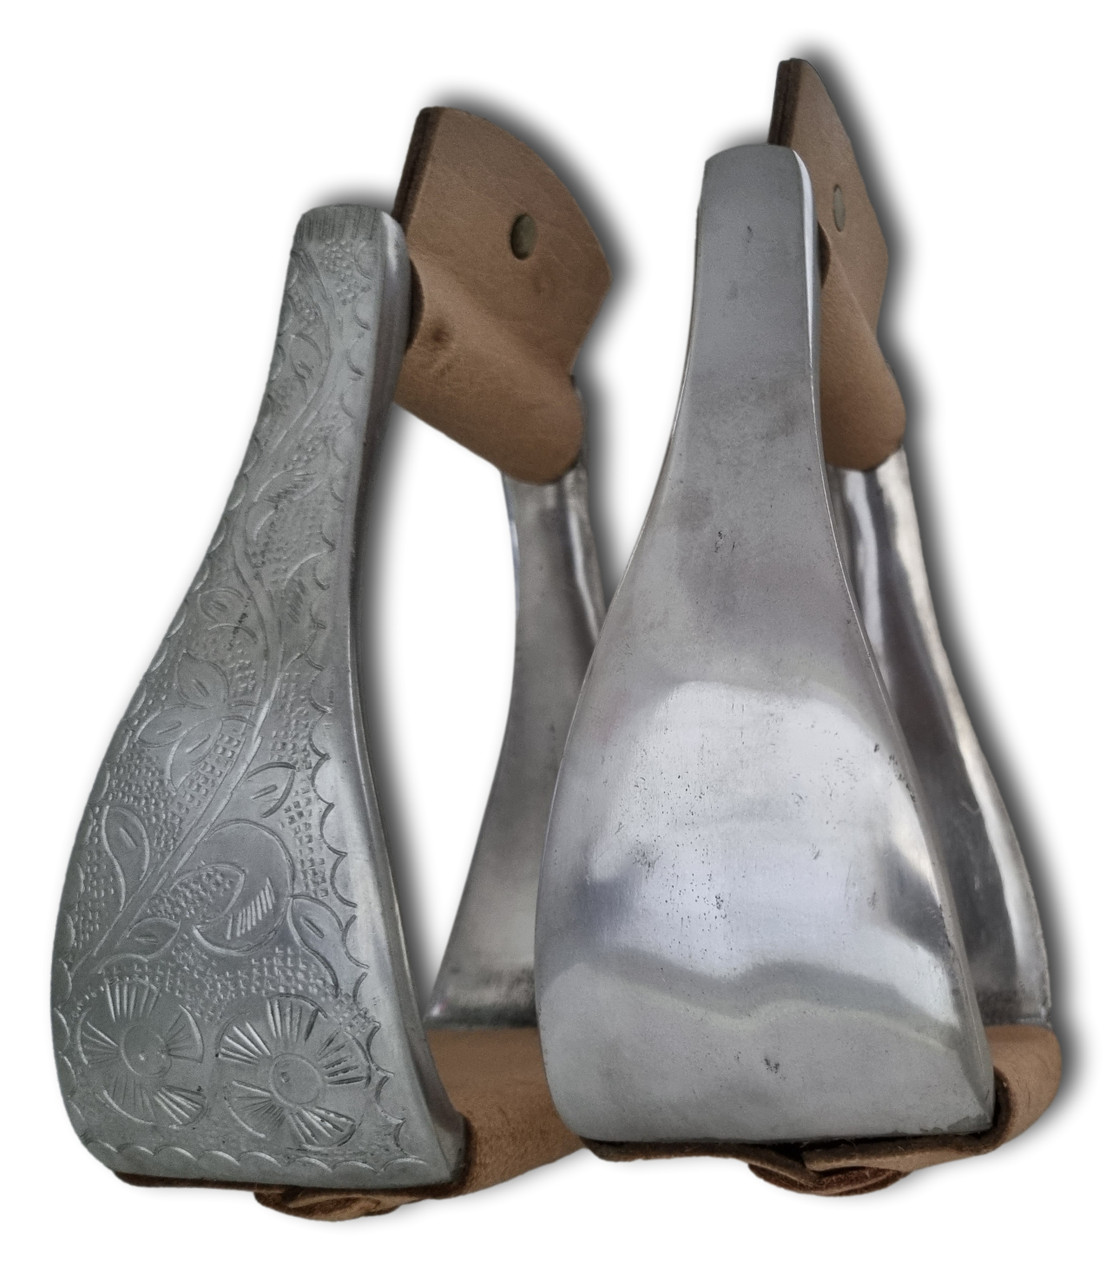 ALUMINUN STIRRUPS, DECORATED WITH ENGRAVING ON ONE SIDE WESTERN STIRRUP 13cm/ 5”